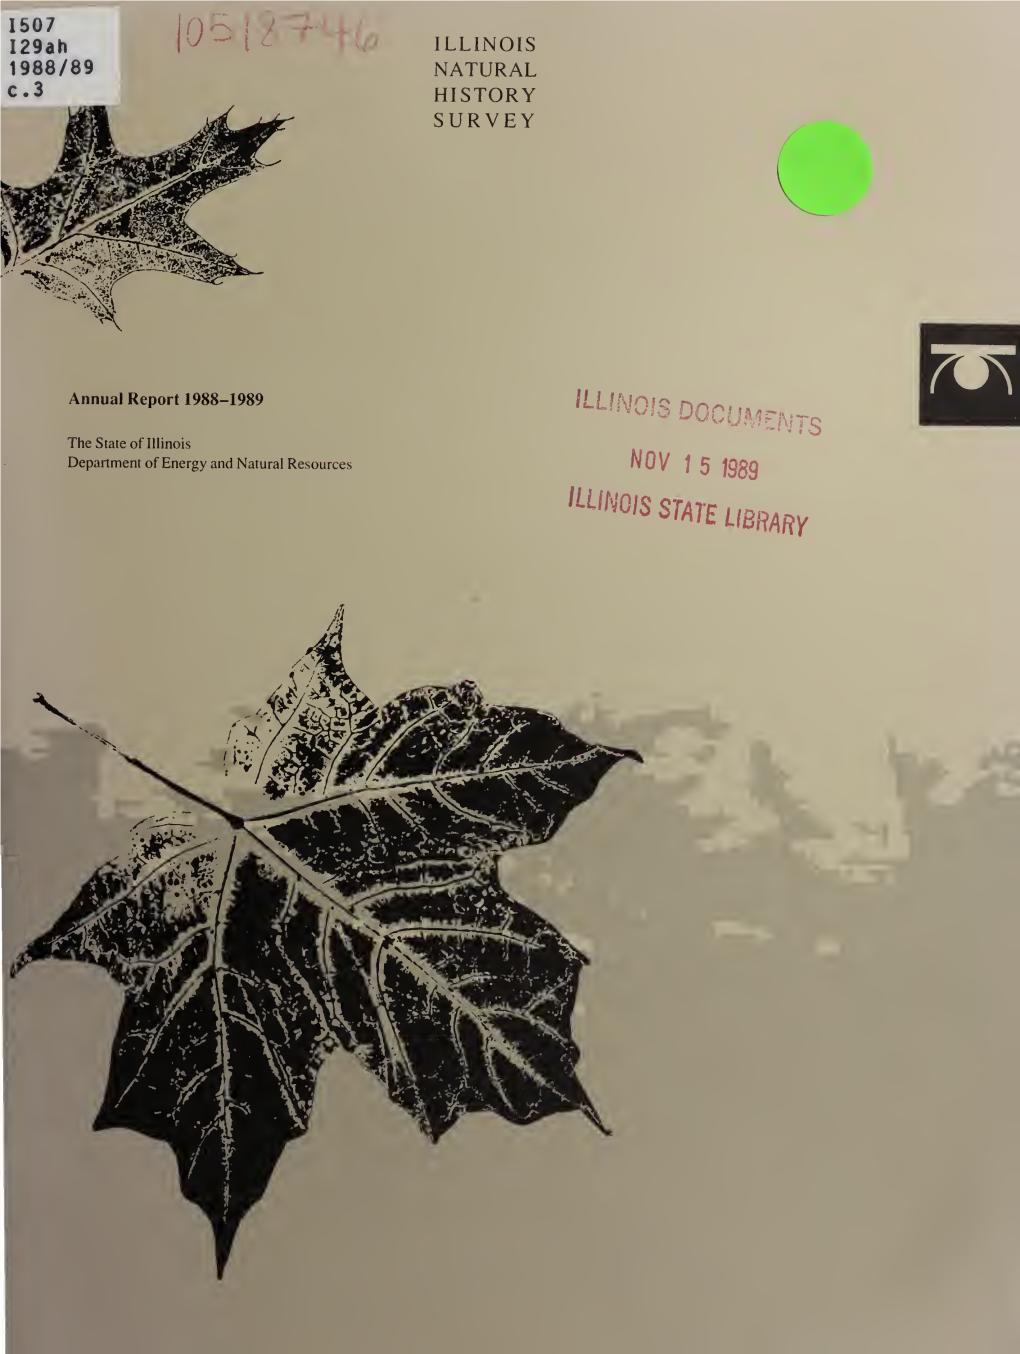 Illinois Natural History Survey Annual Report. Highlights